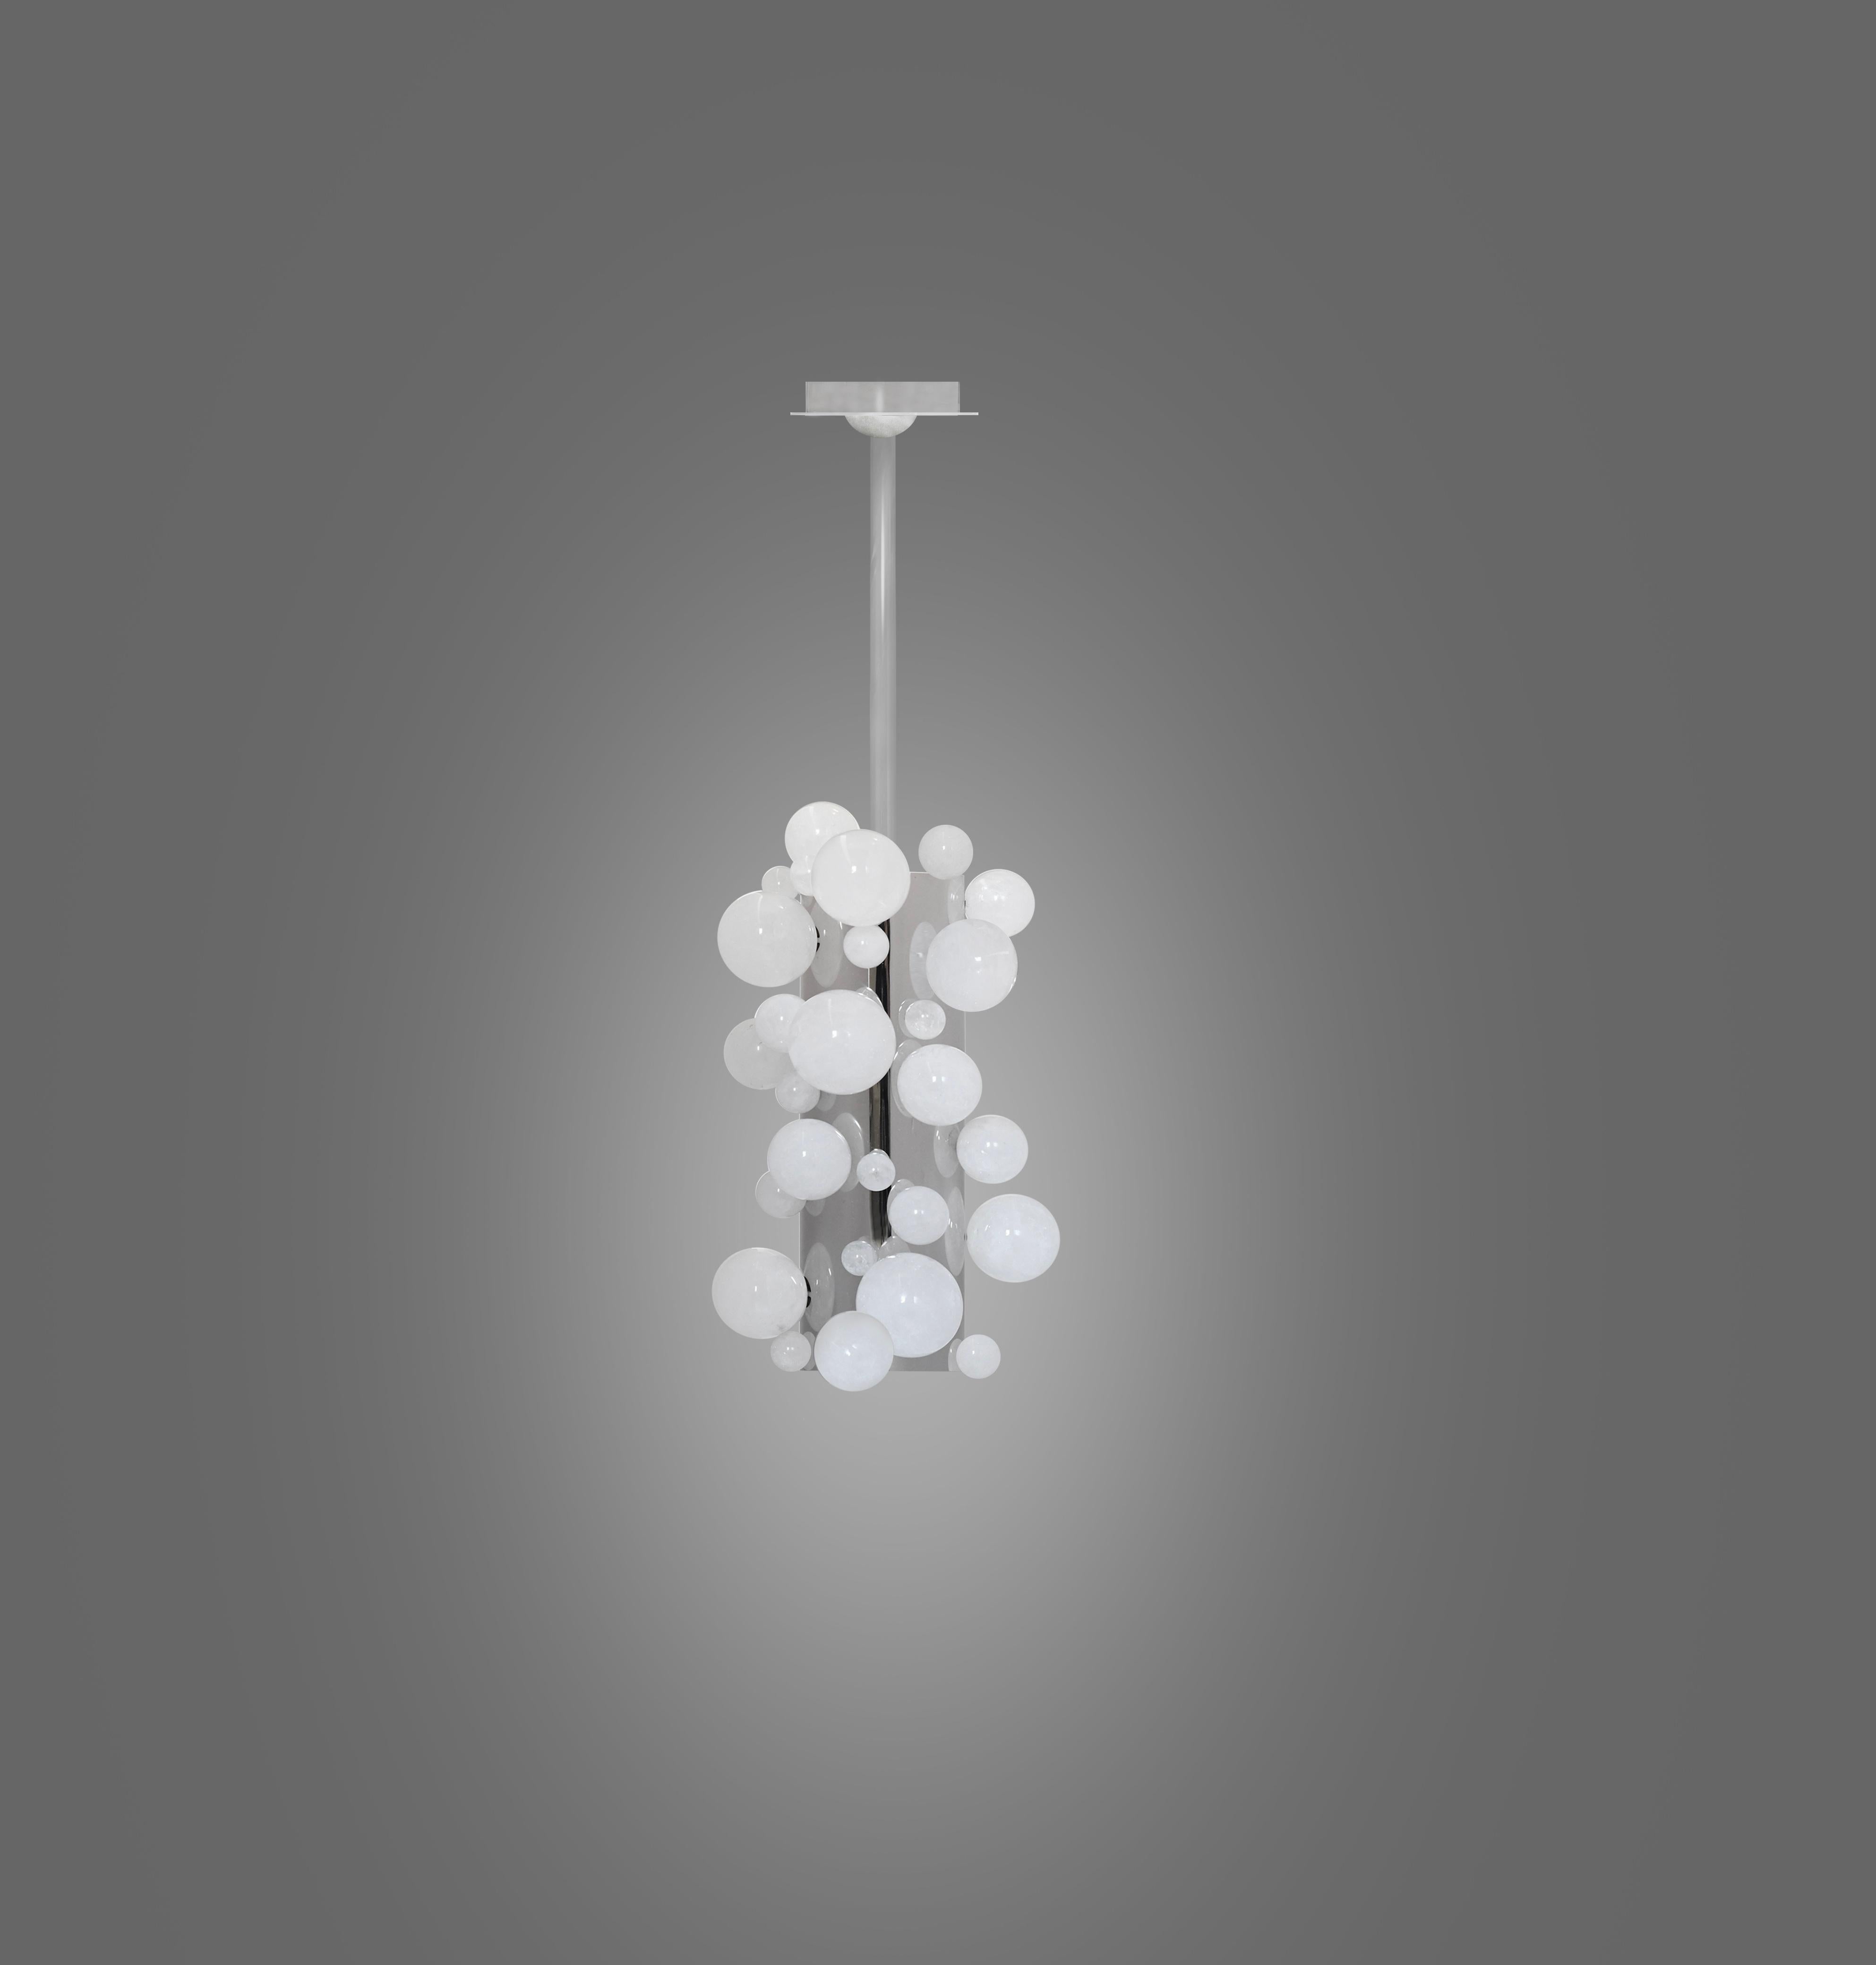 Bubble rock crystal pendant light with nickel plating finish. Created by Phoenix Gallery, NYC. 
Two sockets installed. Use LED warm light bulbs. 50w Each. 100 w total. 
Dimension of the Pendant: 8